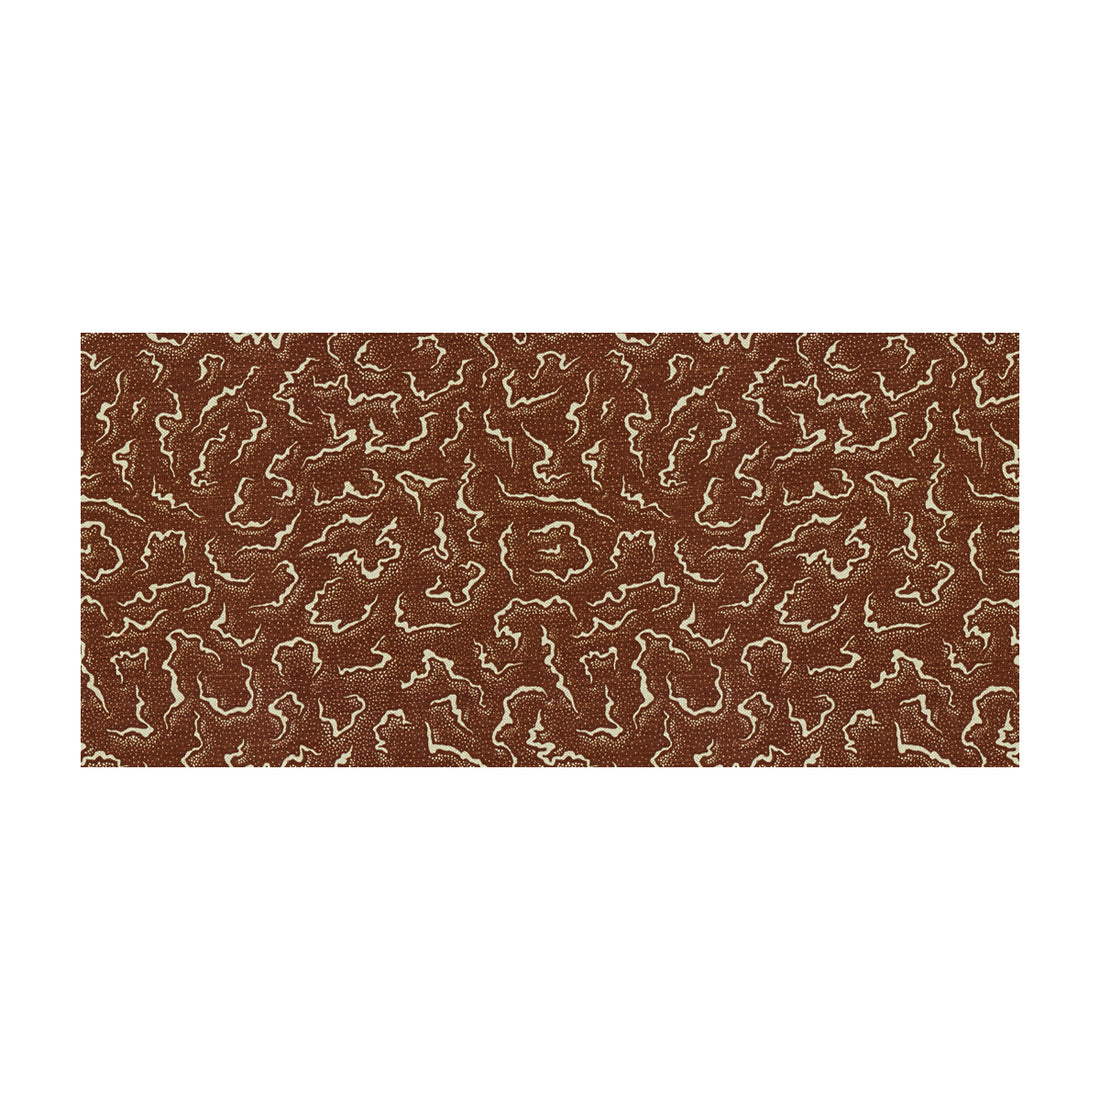 Eleuthera fabric in chocolate color - pattern GWF-3430.96.0 - by Lee Jofa Modern in the Ashley Hicks Textures collection